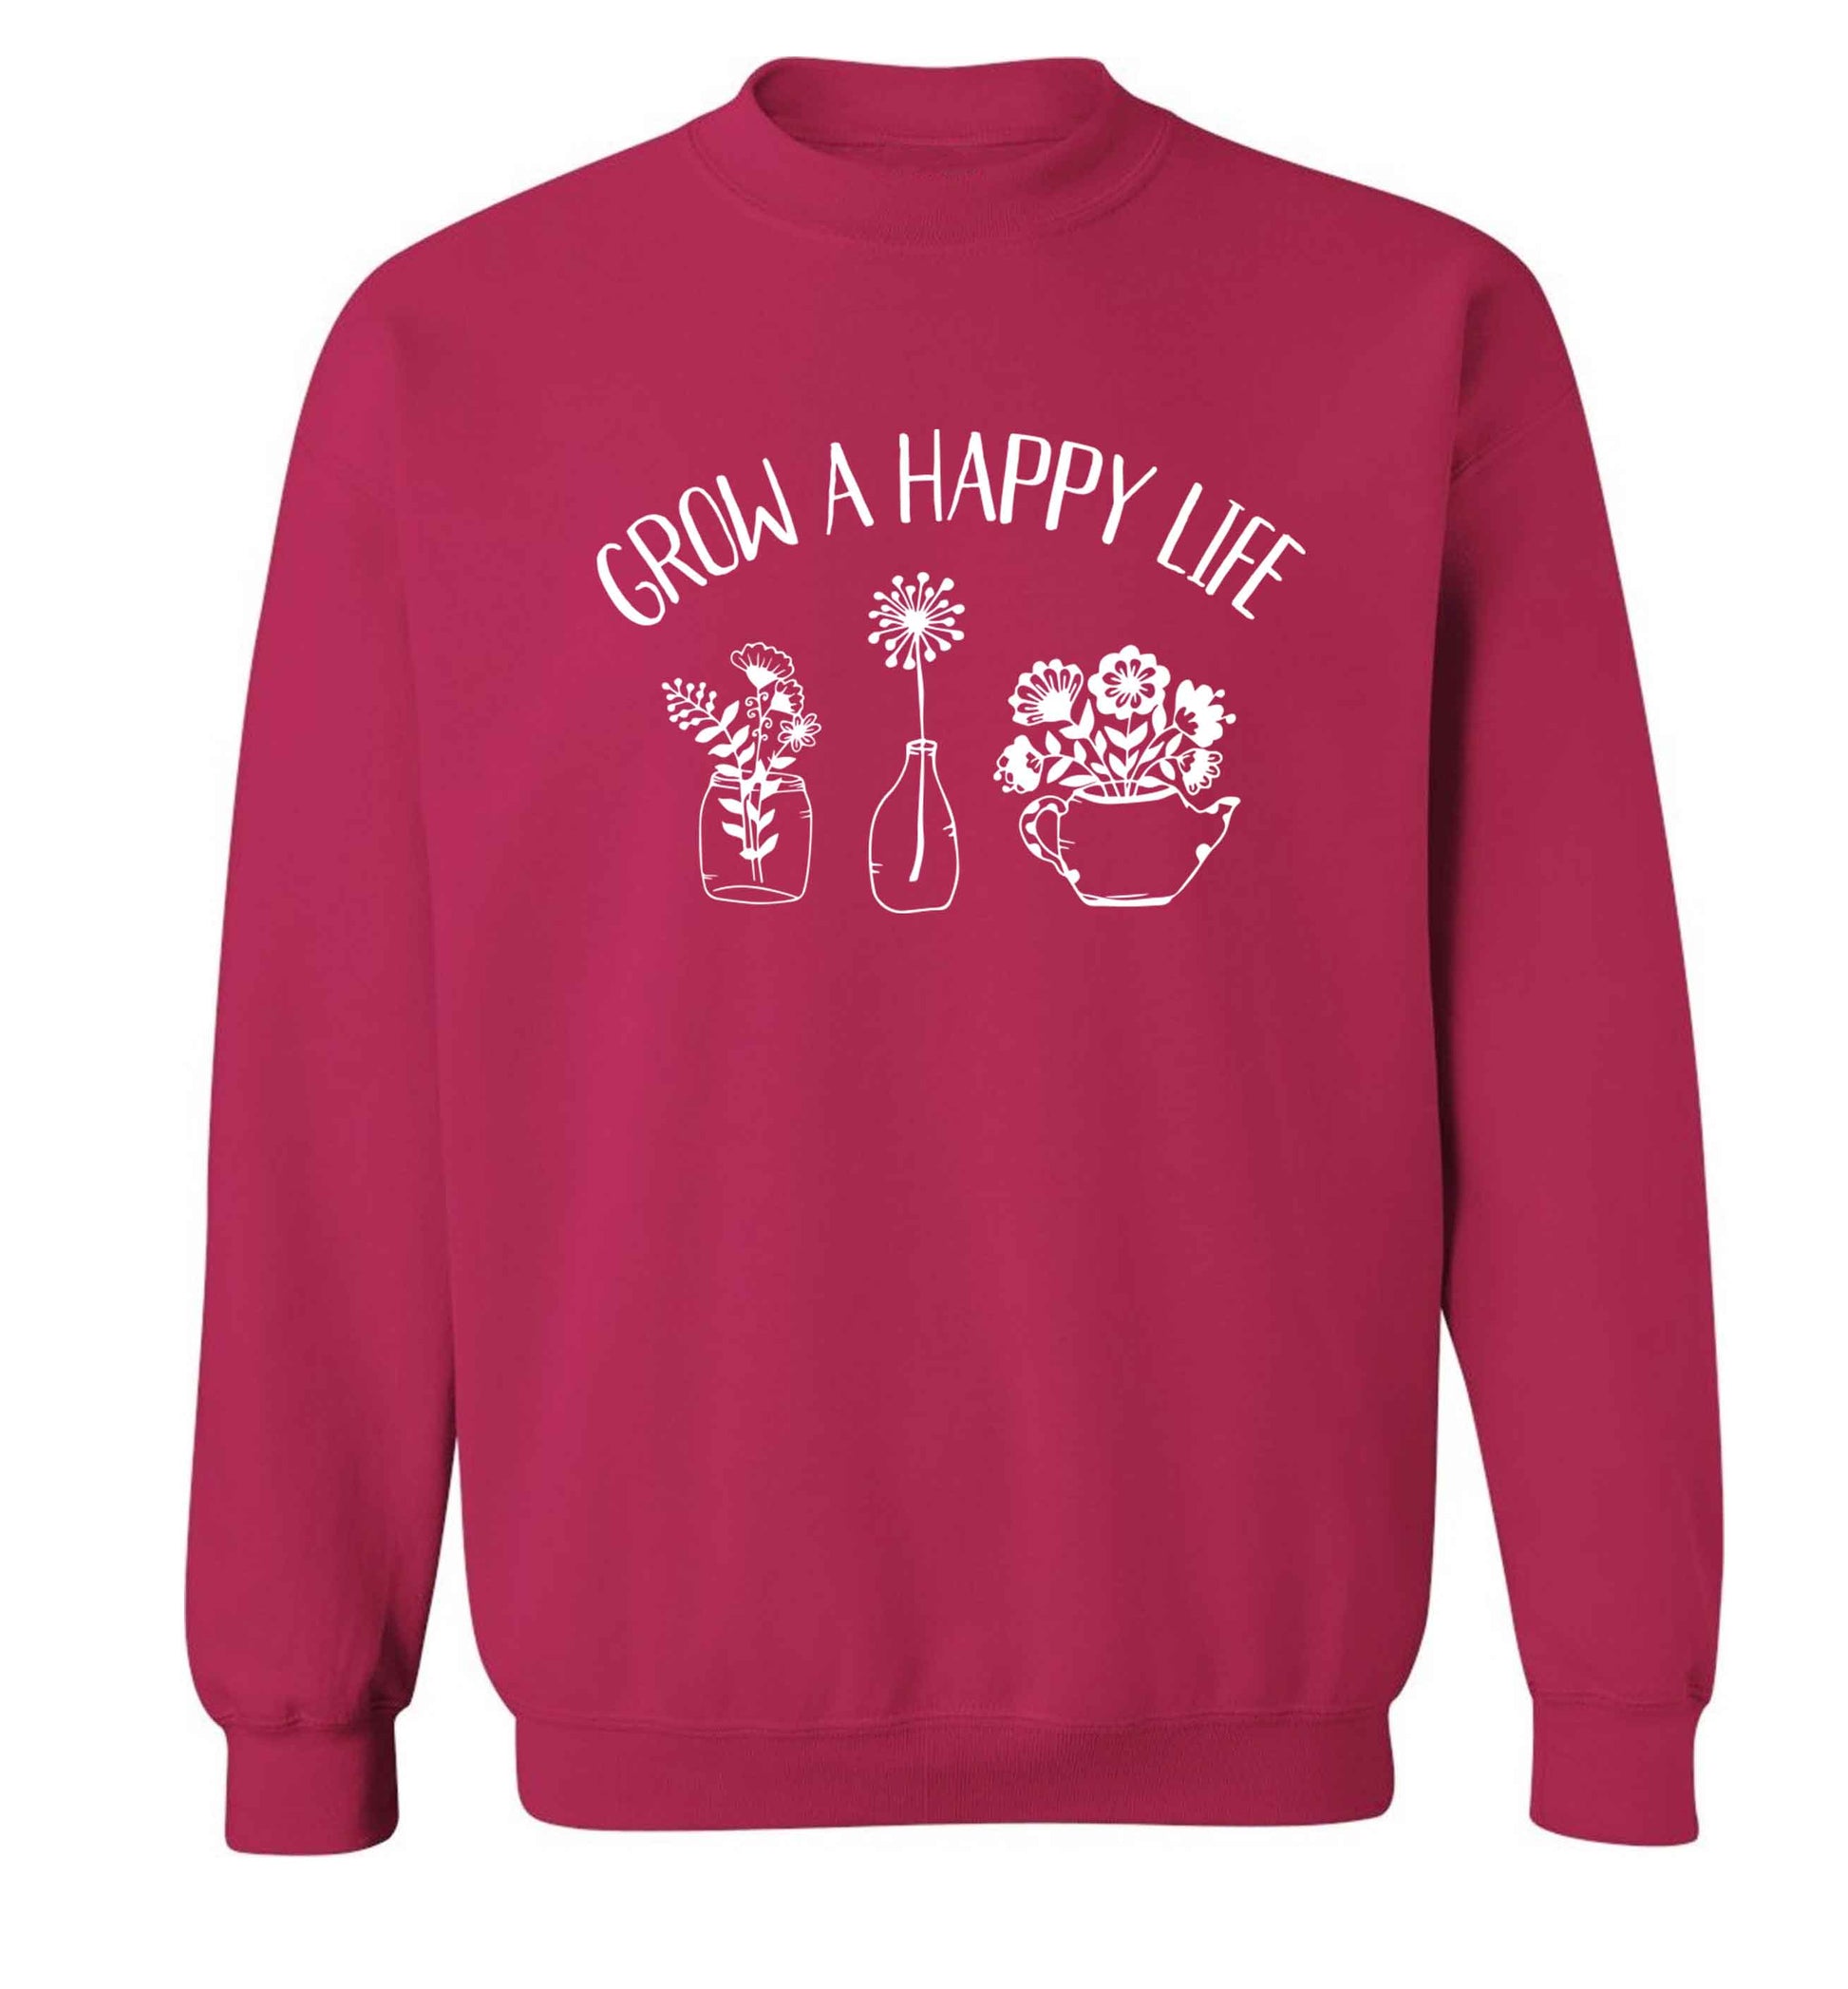 Grow a happy life Adult's unisex pink Sweater 2XL